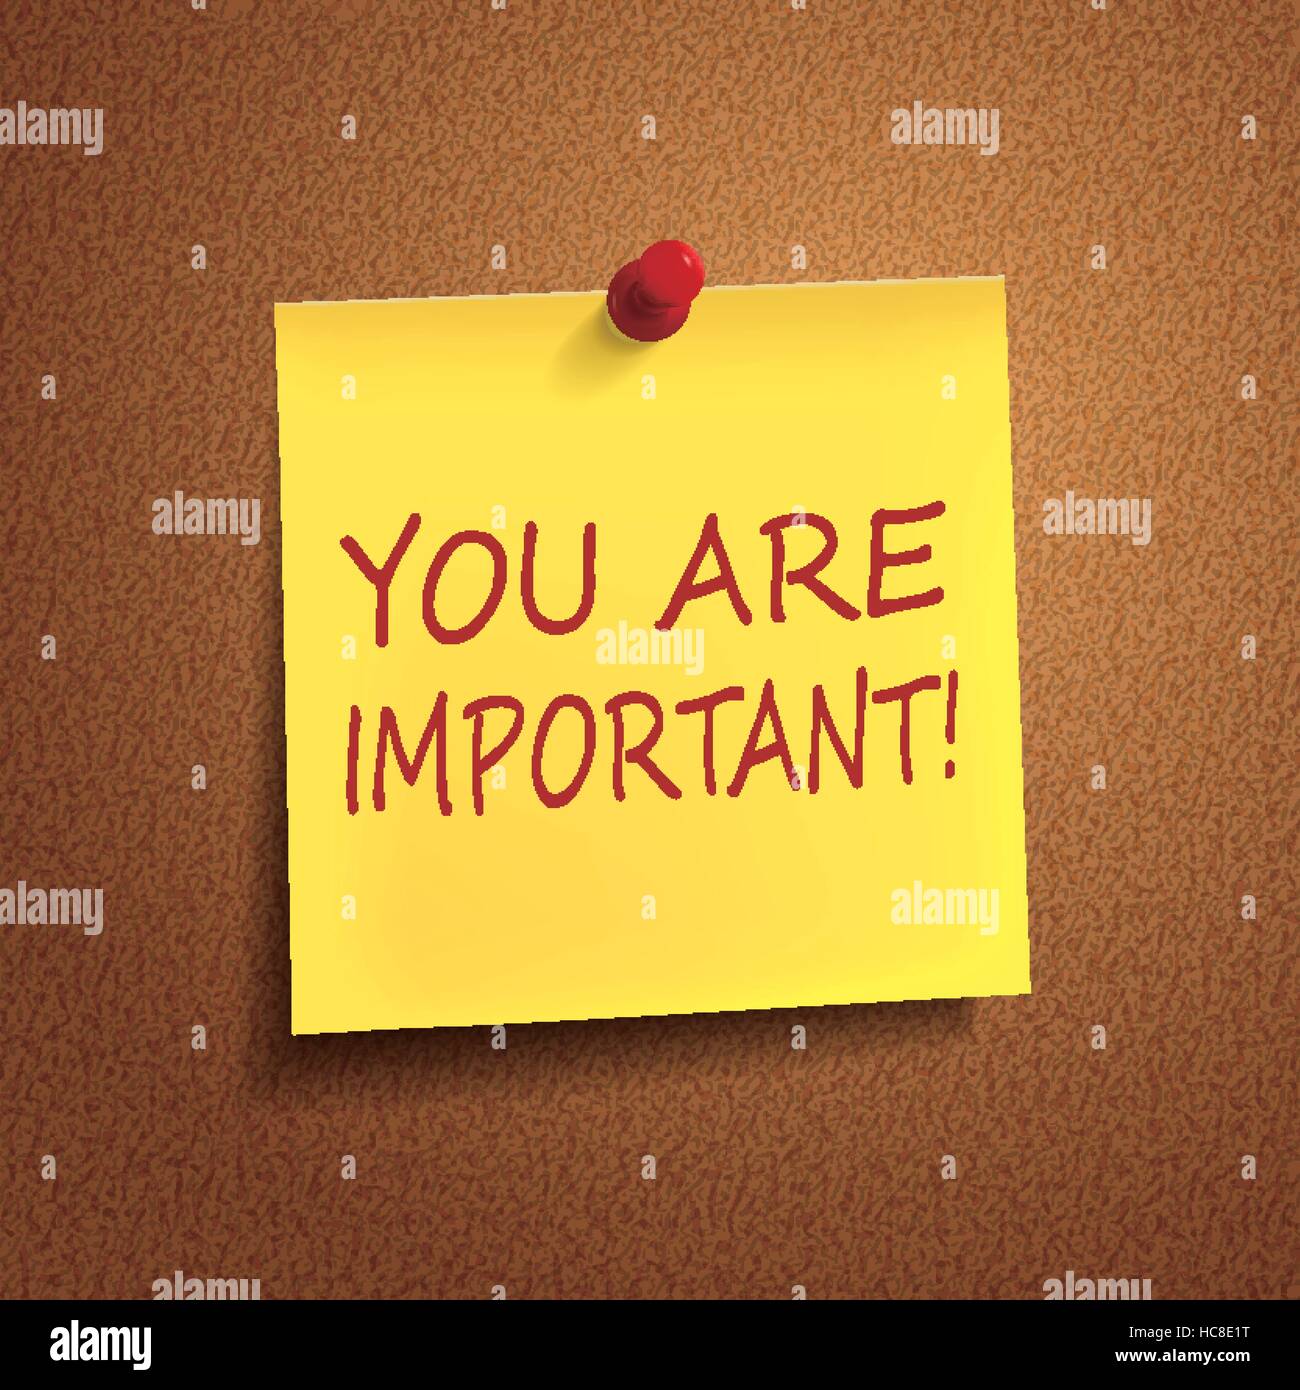 You Are Important Words On Post It Over Brown Background Stock Vector